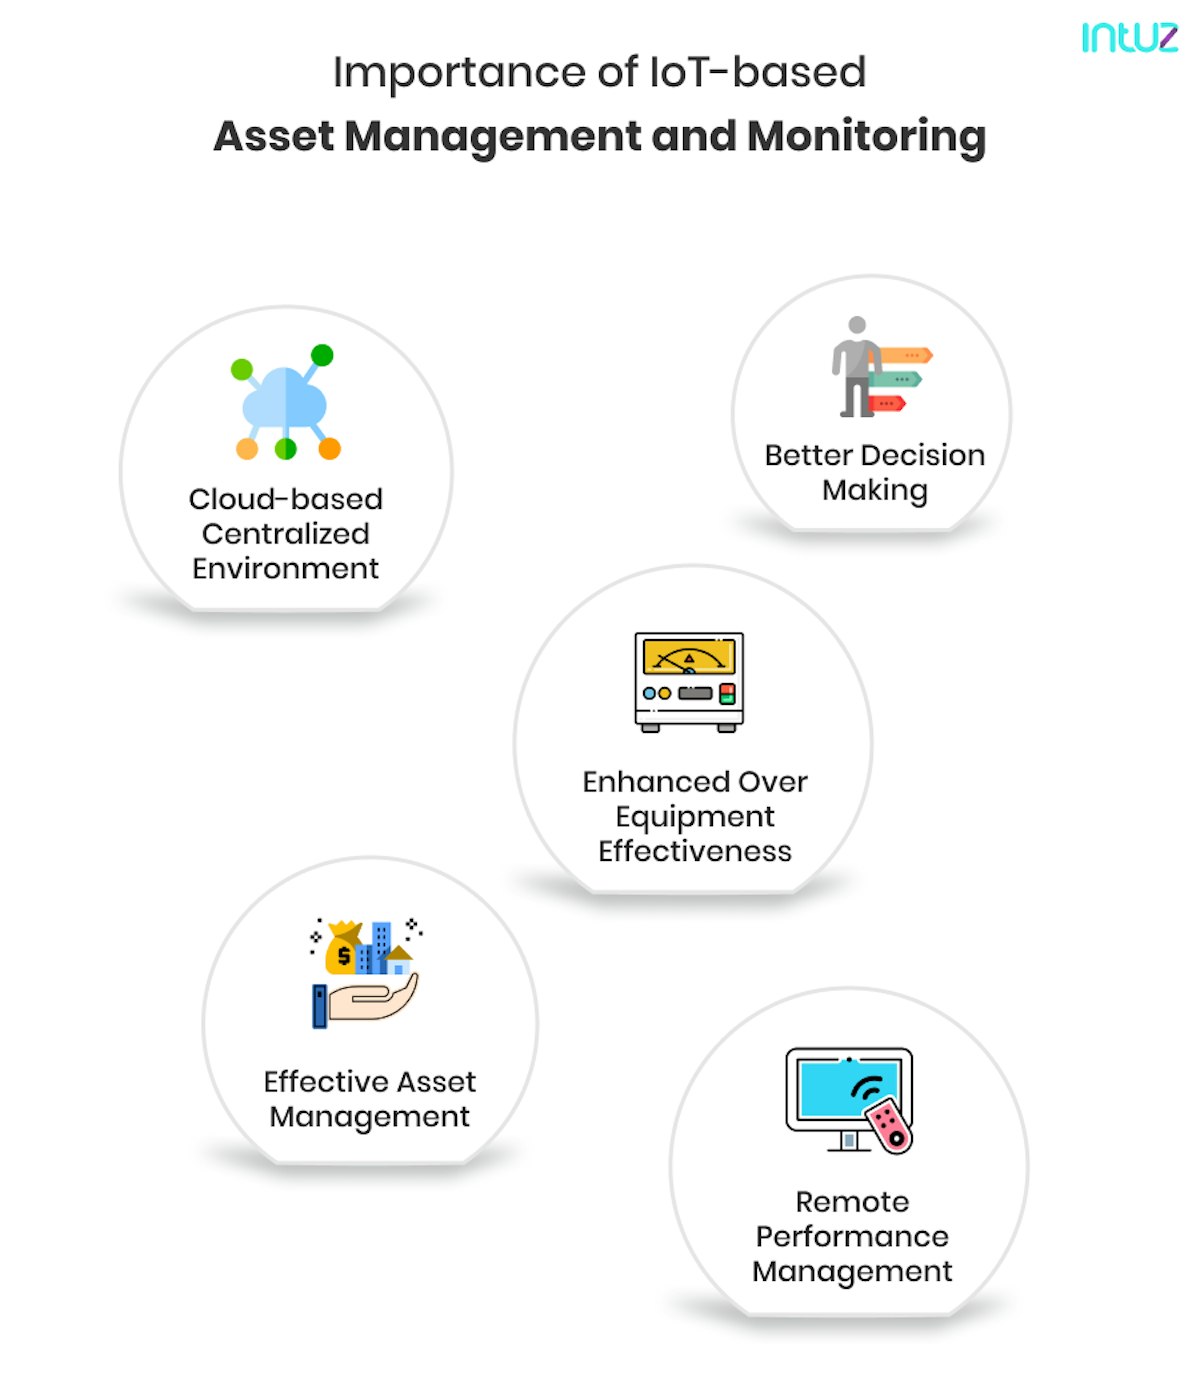 Importance of IoT-based Asset Management and Monitoring